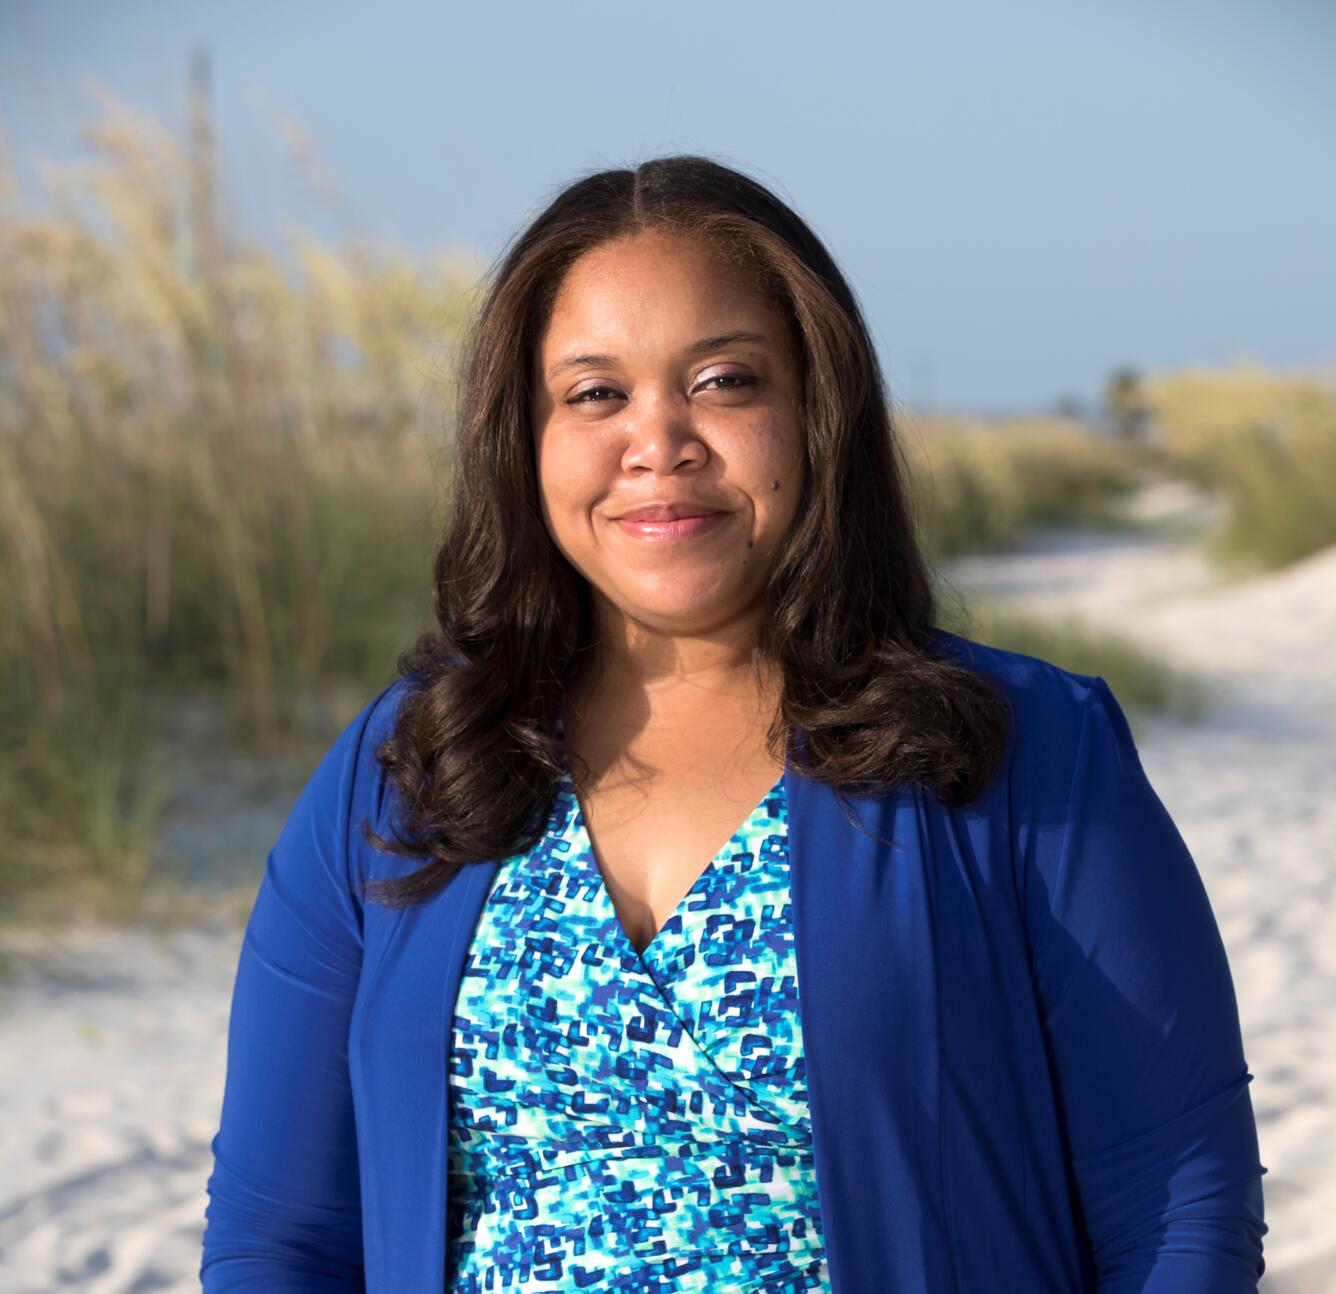 a woman in a blue jacket stands on a vegetated sandy beach